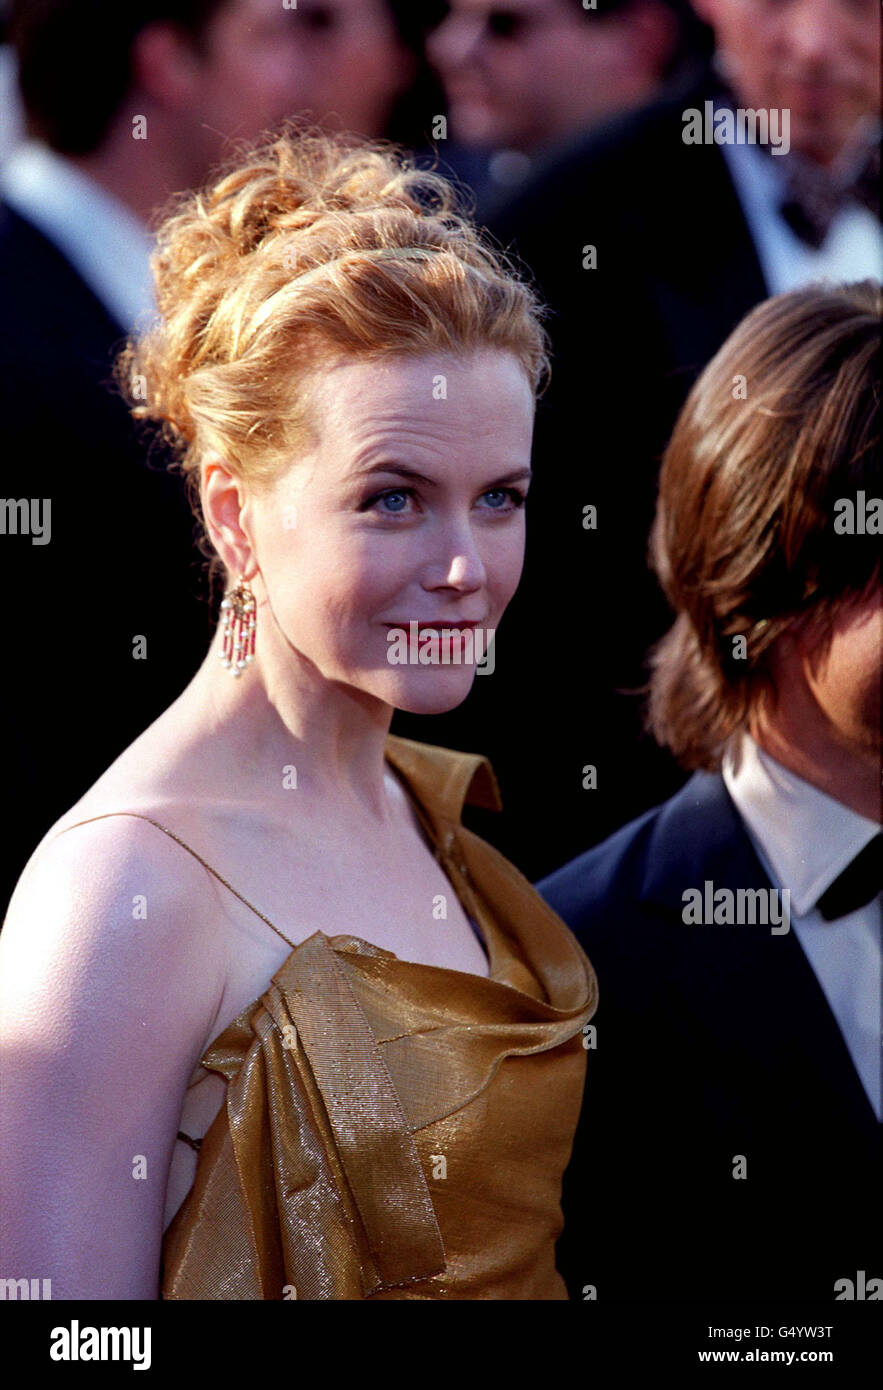 Actress Nicole Kidman, wearing a Dior dress, arriving at the Shrine Auditorium for the 72nd Annual Academy Awards, The Oscars, in Los Angeles. Stock Photo